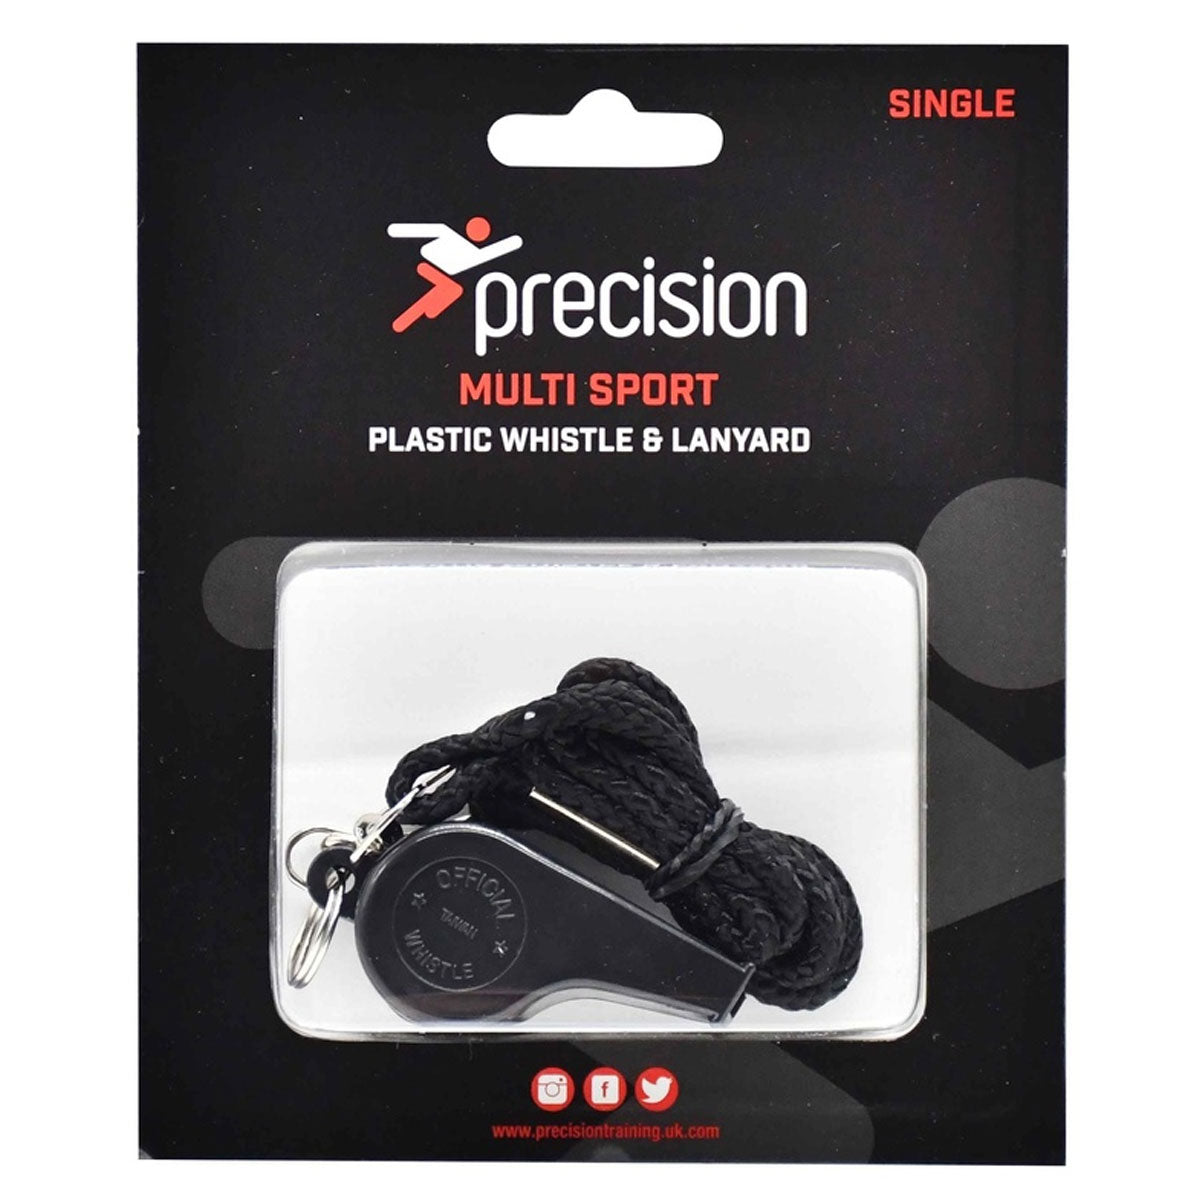 Precision Training Plastic Whistle with Lanyard